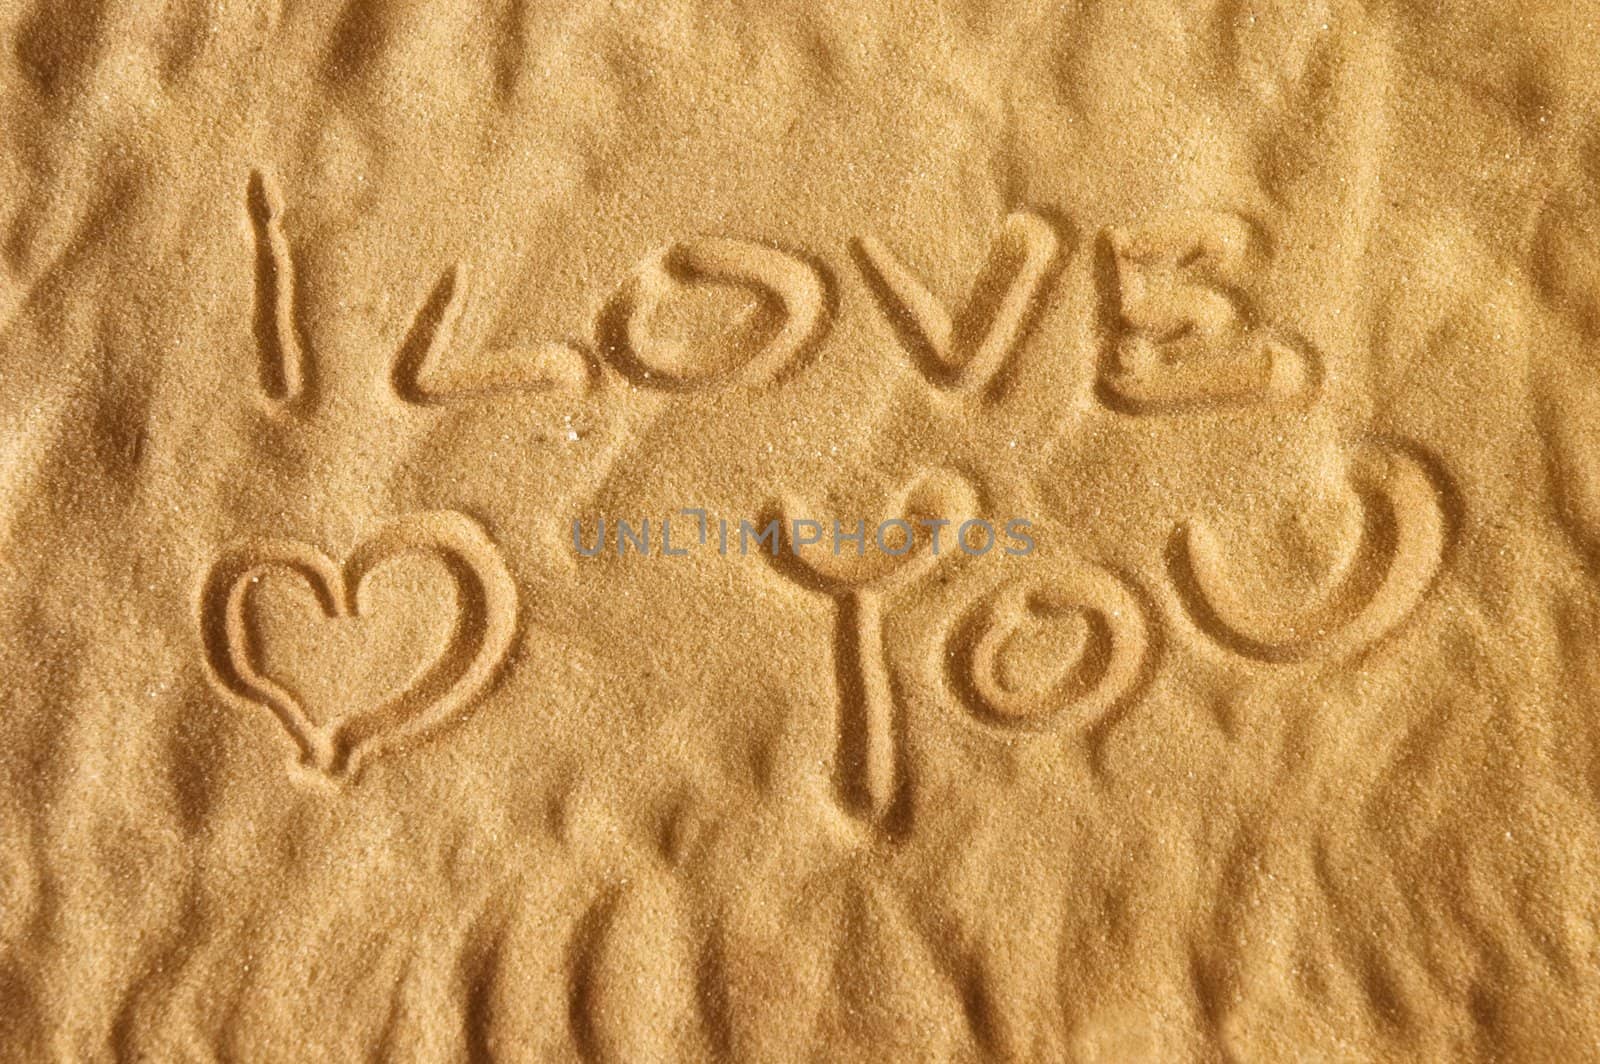 I love you witten on sand with and soft focus for dreamy atmosphere